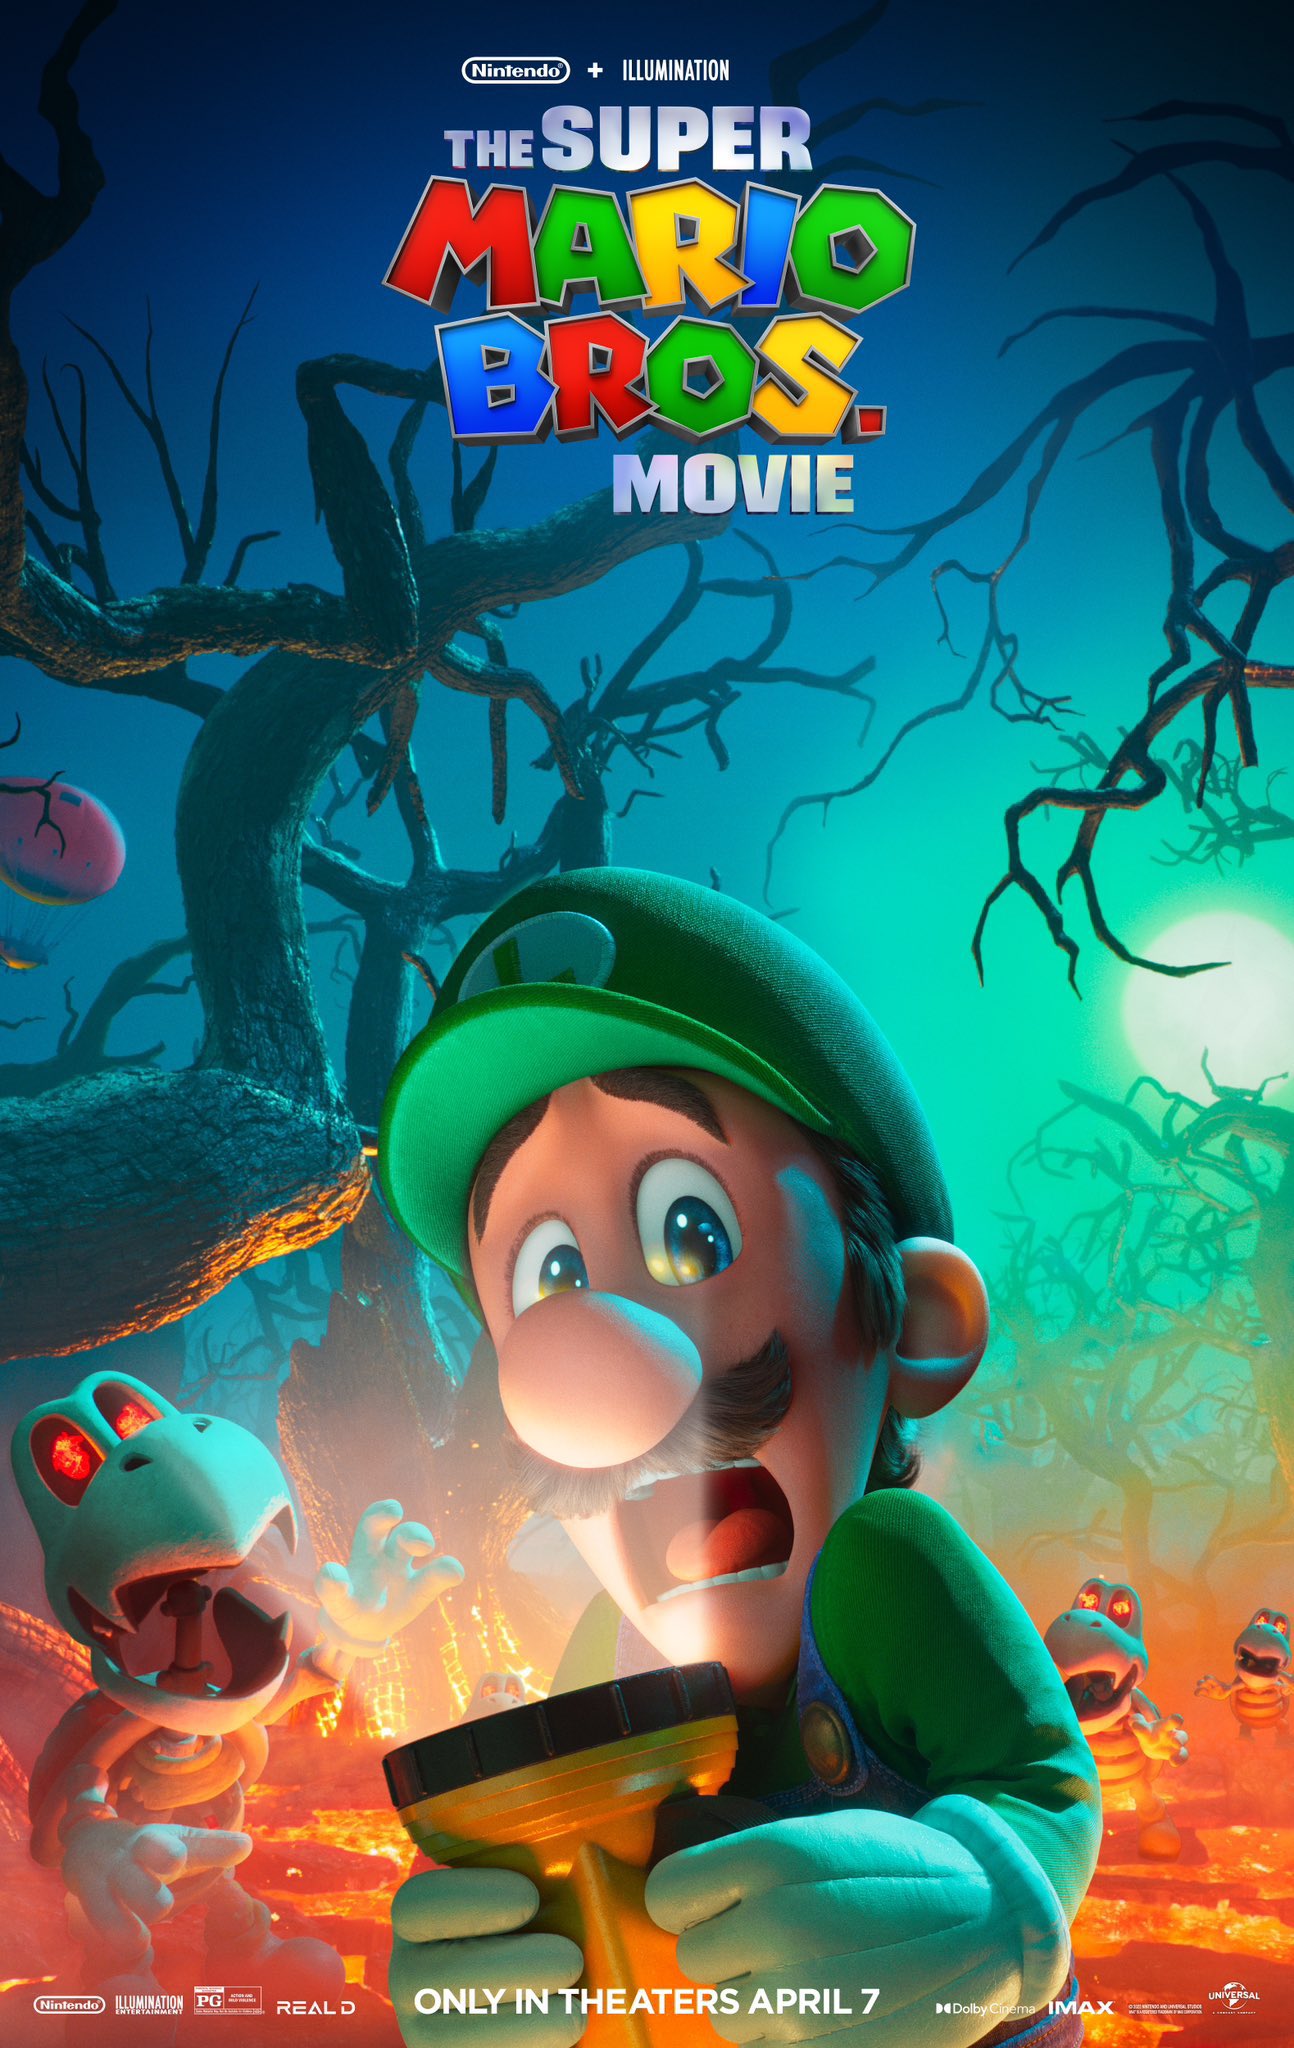 DiscussingFilm on X: First posters for Luigi and Toad, voiced by